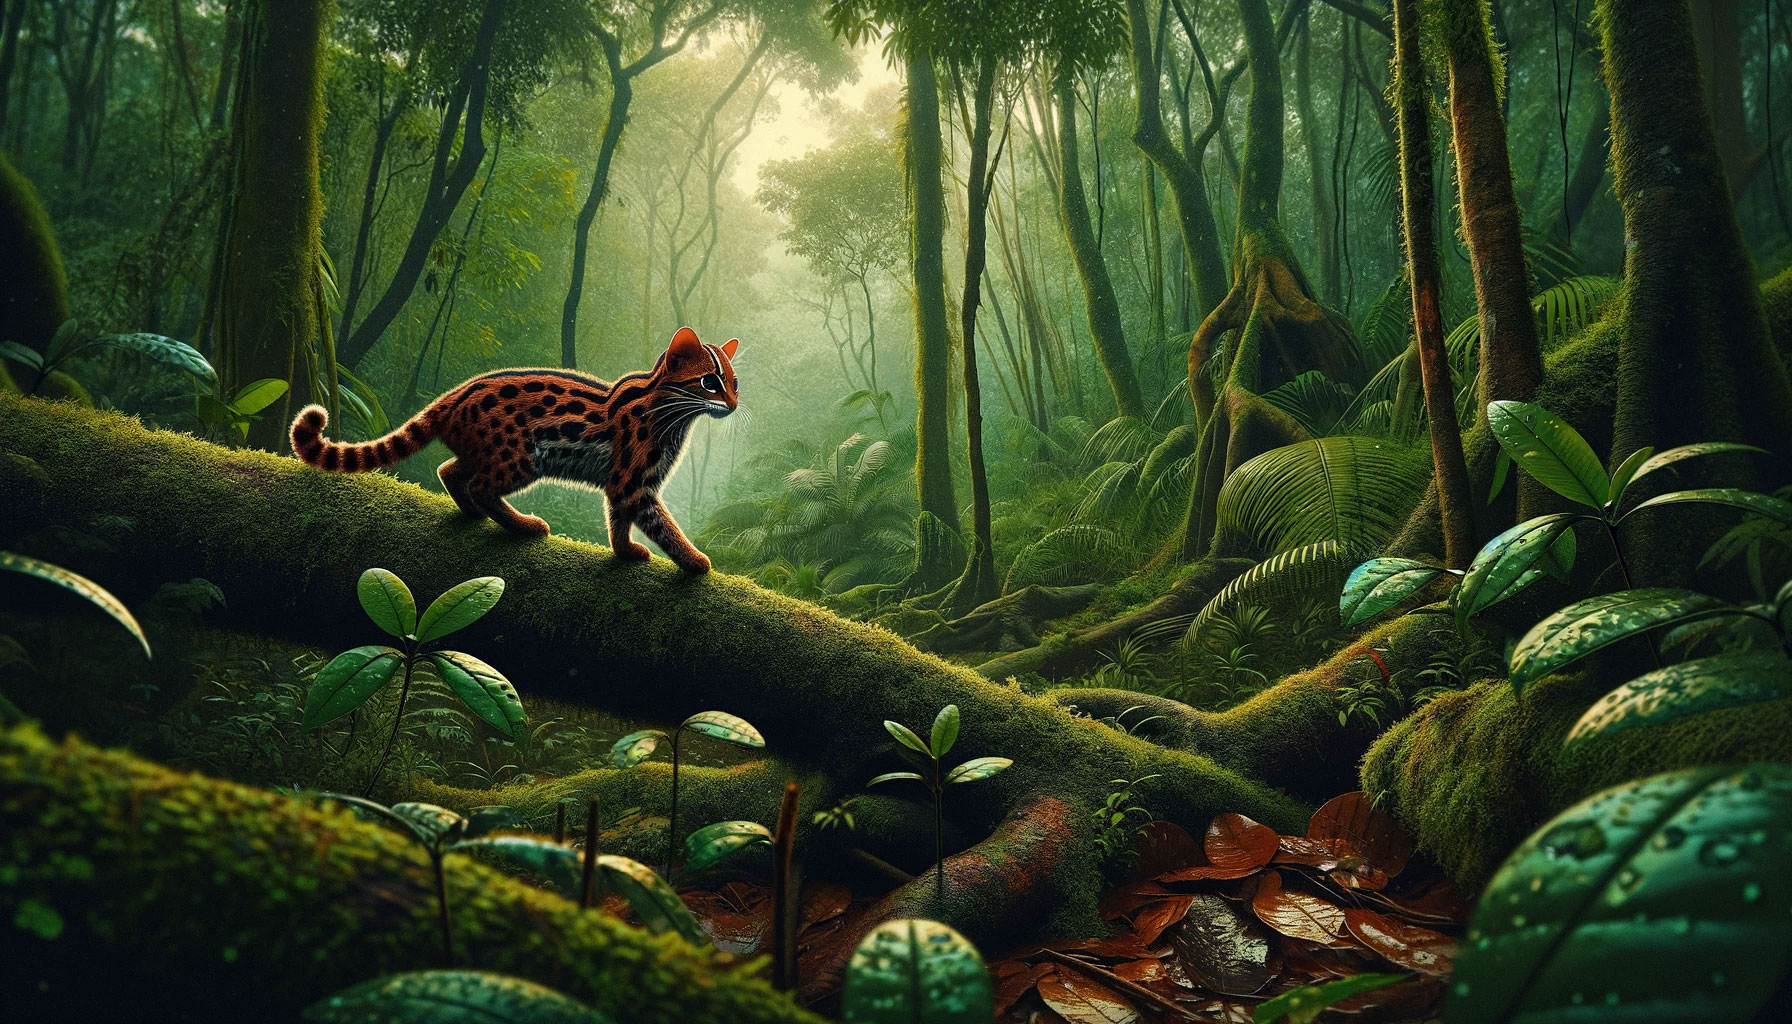 a-realistic-lo-fi-style-image-showcasing-the-habitat-and-behavior-of-the-rusty-spotted-cat-the-setting-is-a-dense-lush-forest-in-india-or-sri-lanka